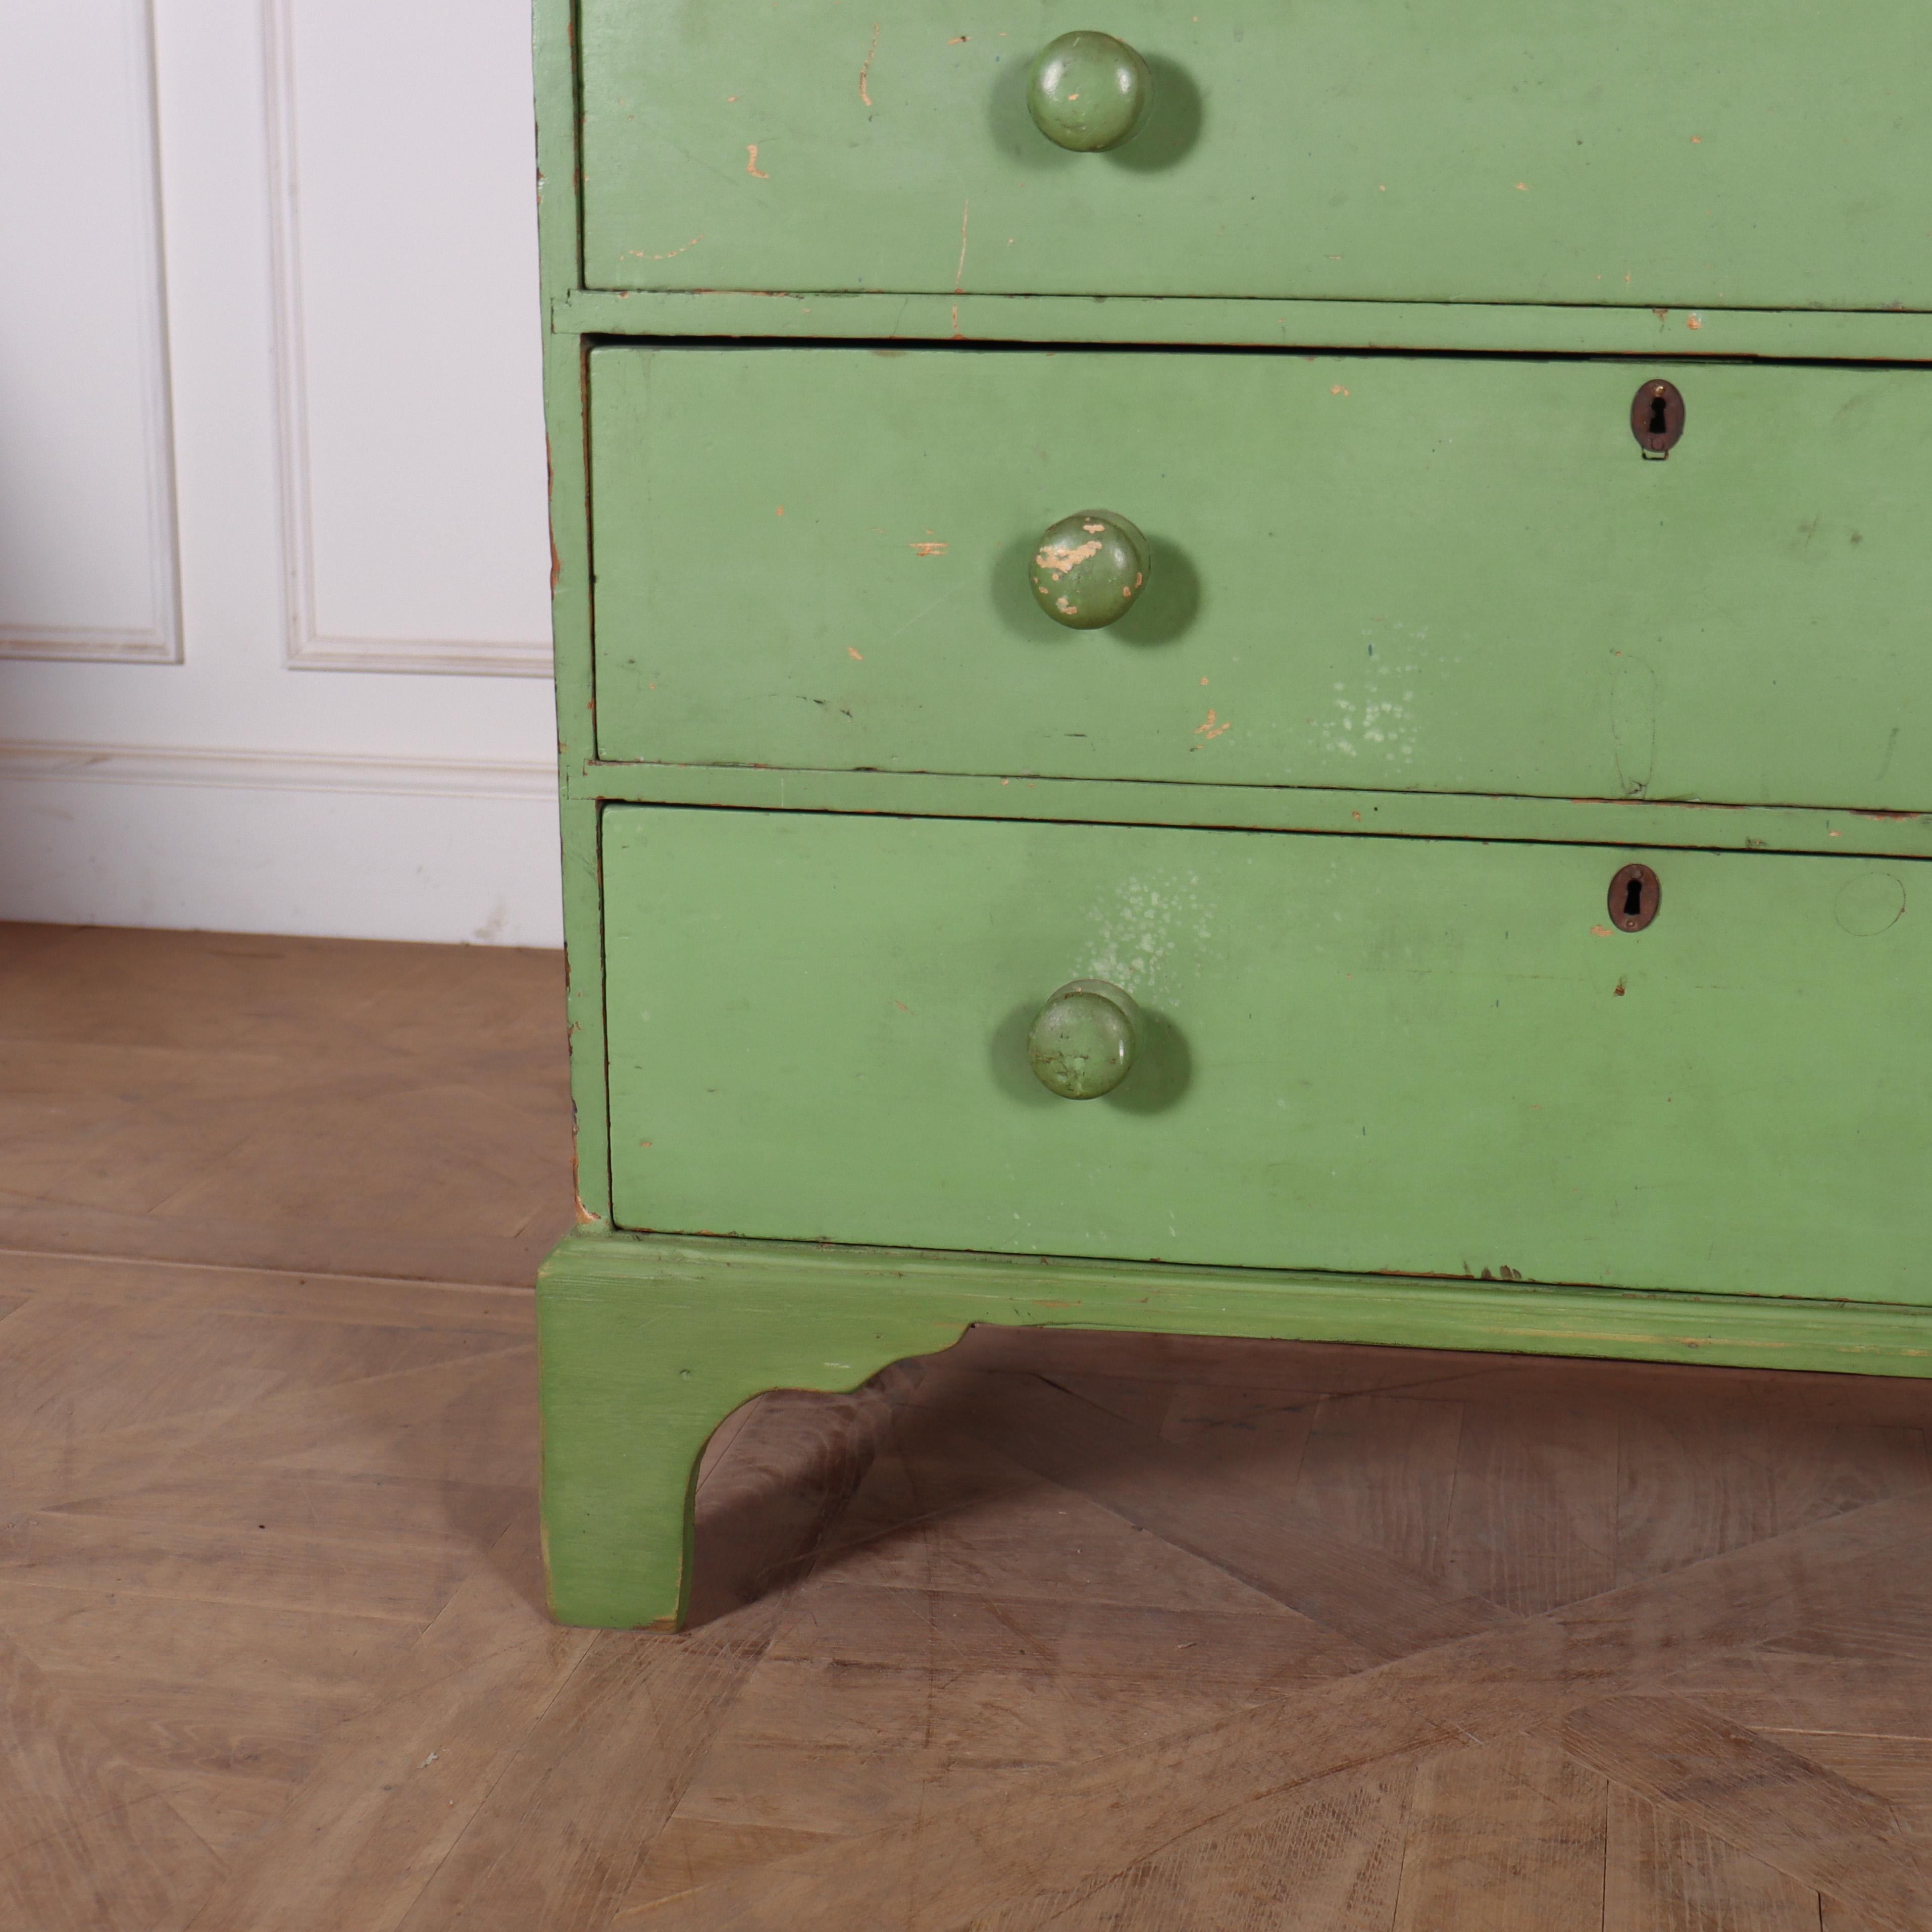 Early 19th century English original painted pine chest of drawers in a wacky green colour. 1830.
Reference: 7891
Dimensions
40.5 inches (103 cms) Wide
21 inches (53 cms) Deep
41 inches (104 cms) High